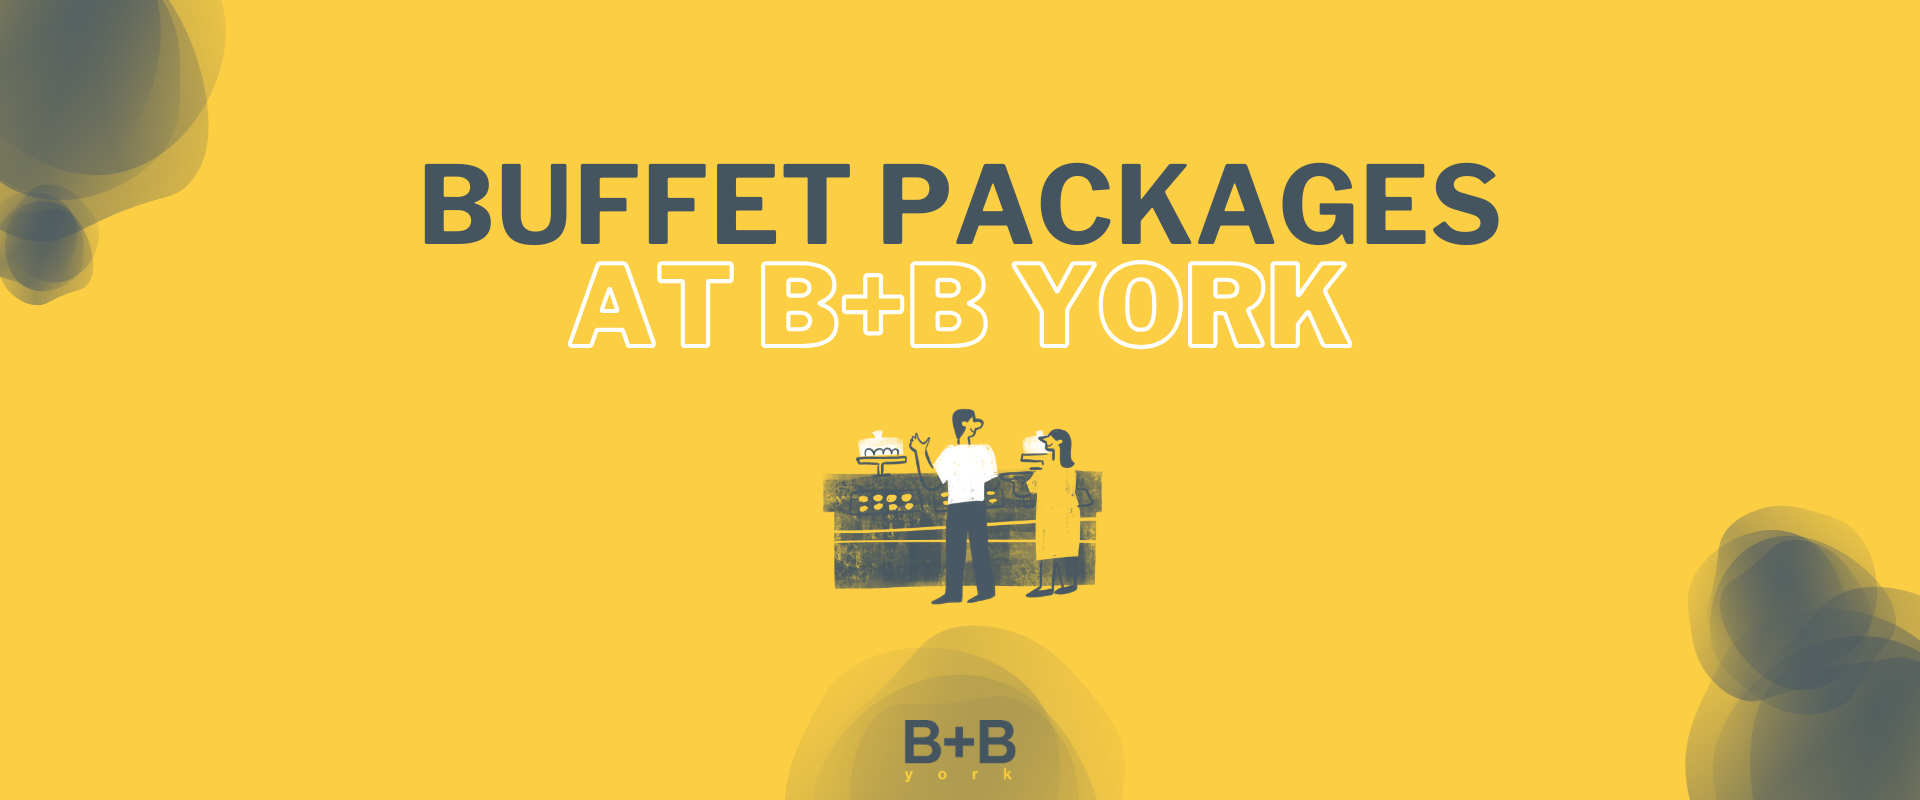 Buffet Packages at B+B York